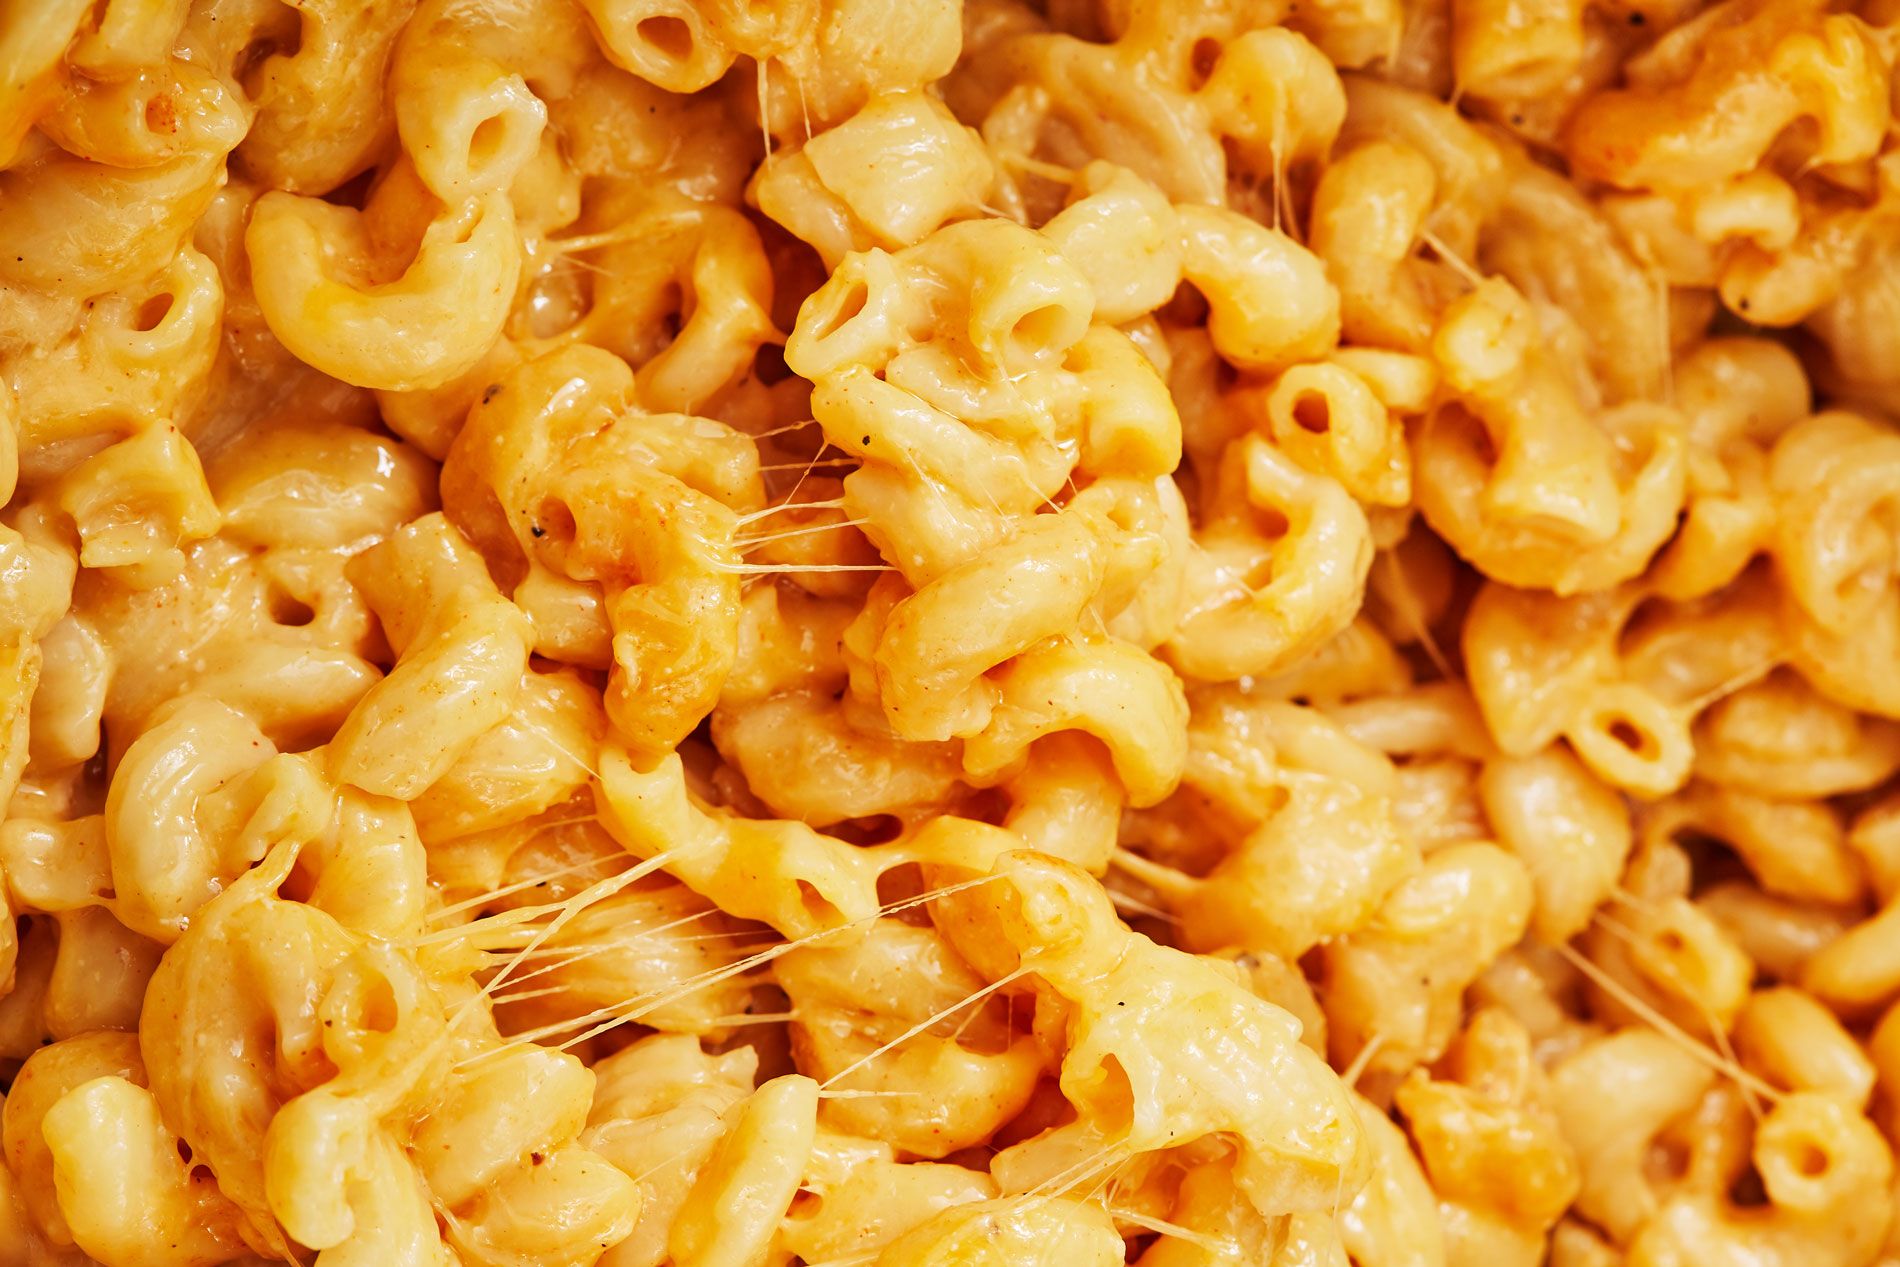 instant pot mac and cheese